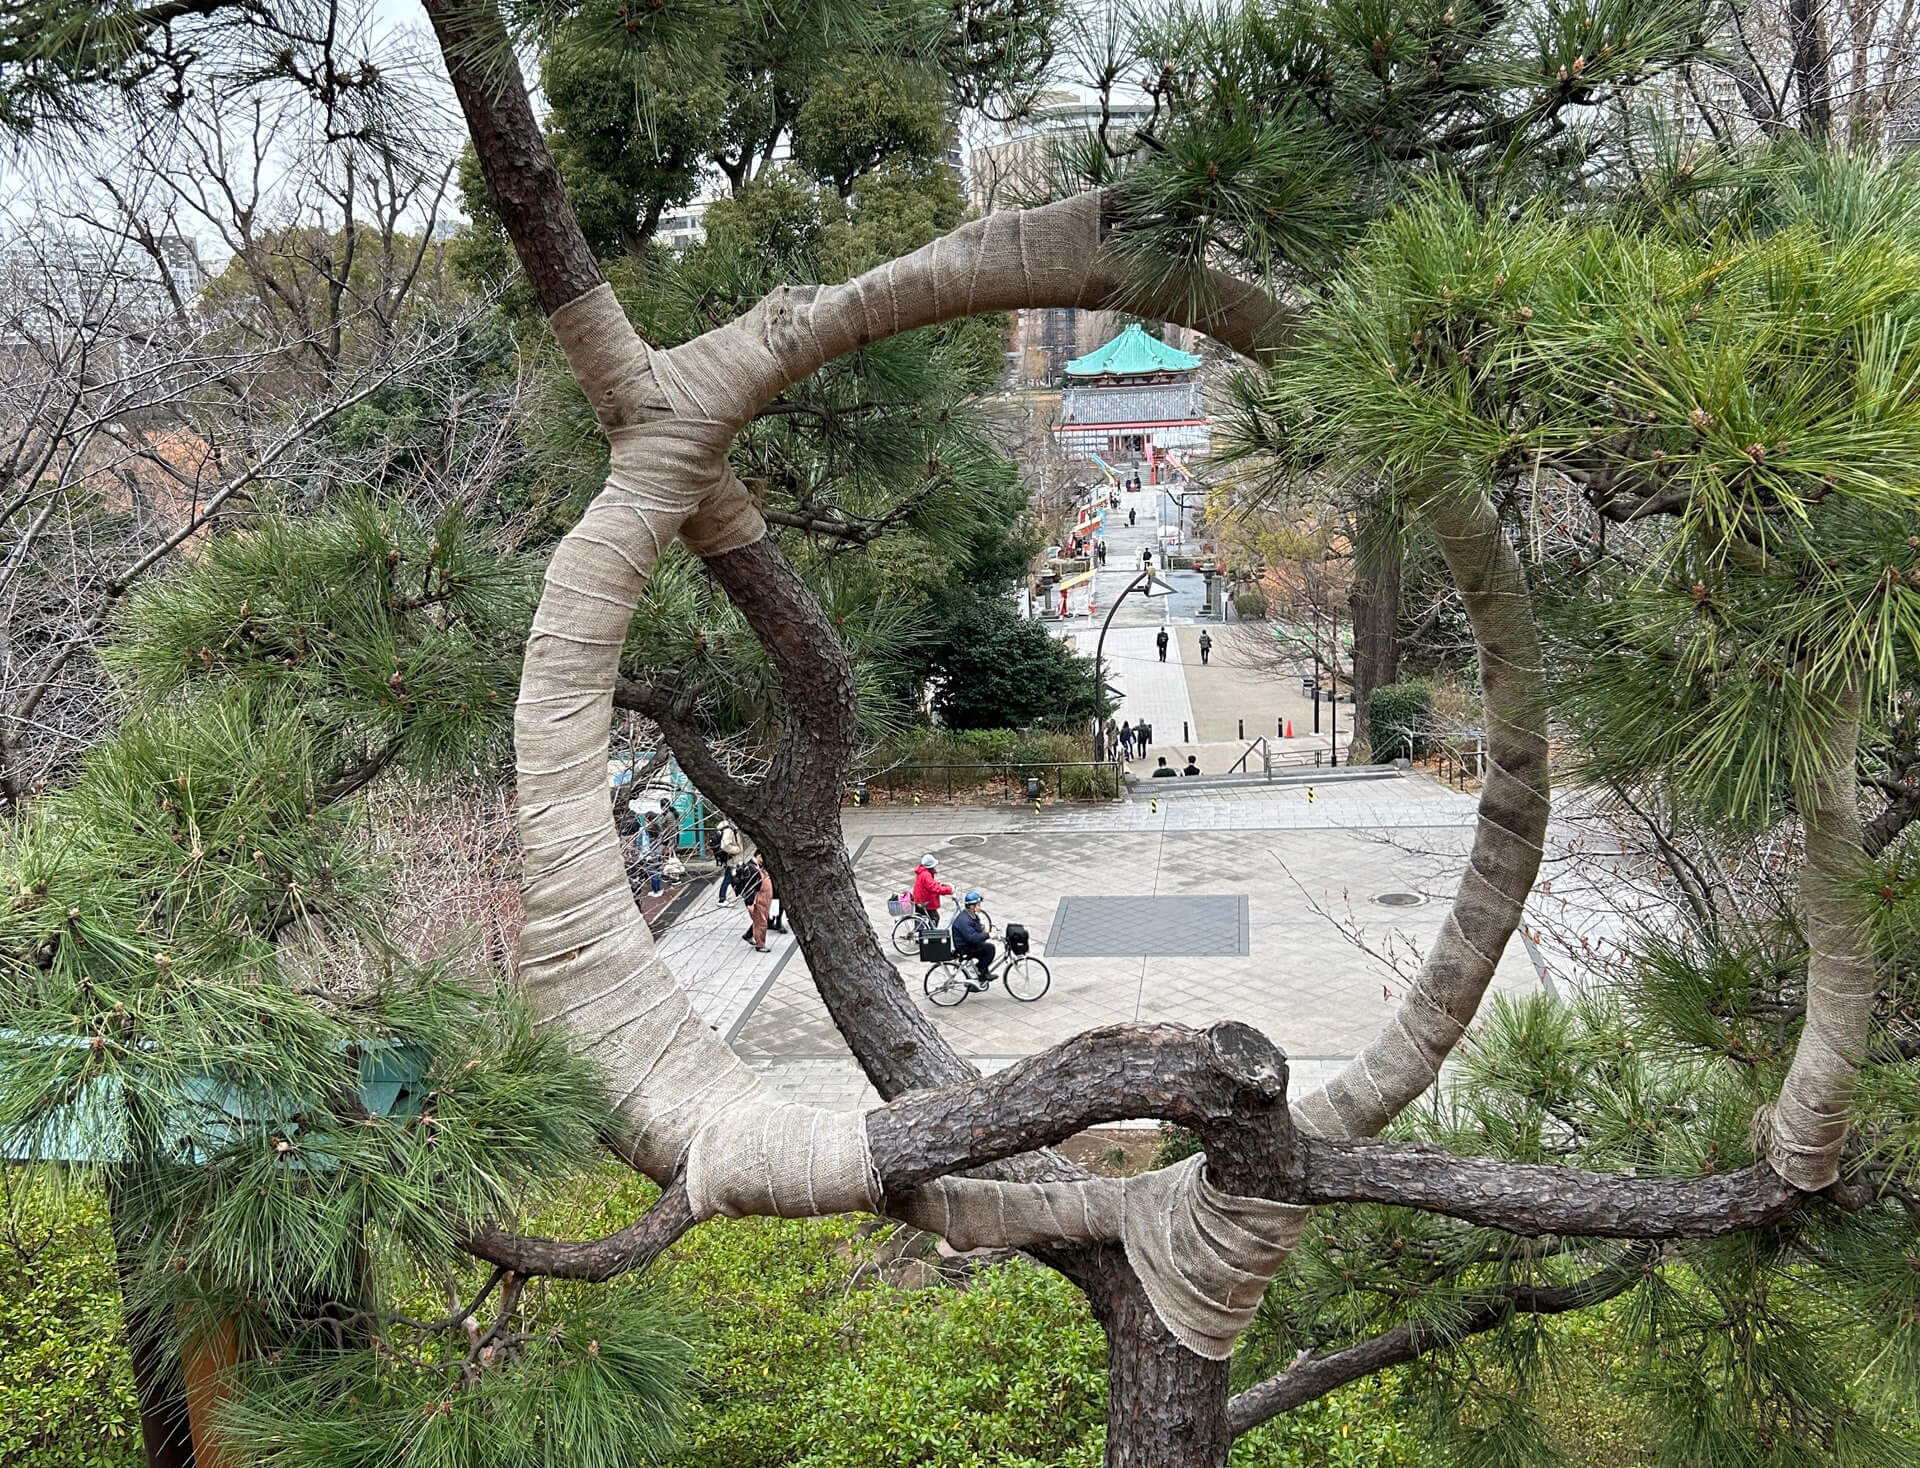 View of Ueno Park through branches trained in a circle